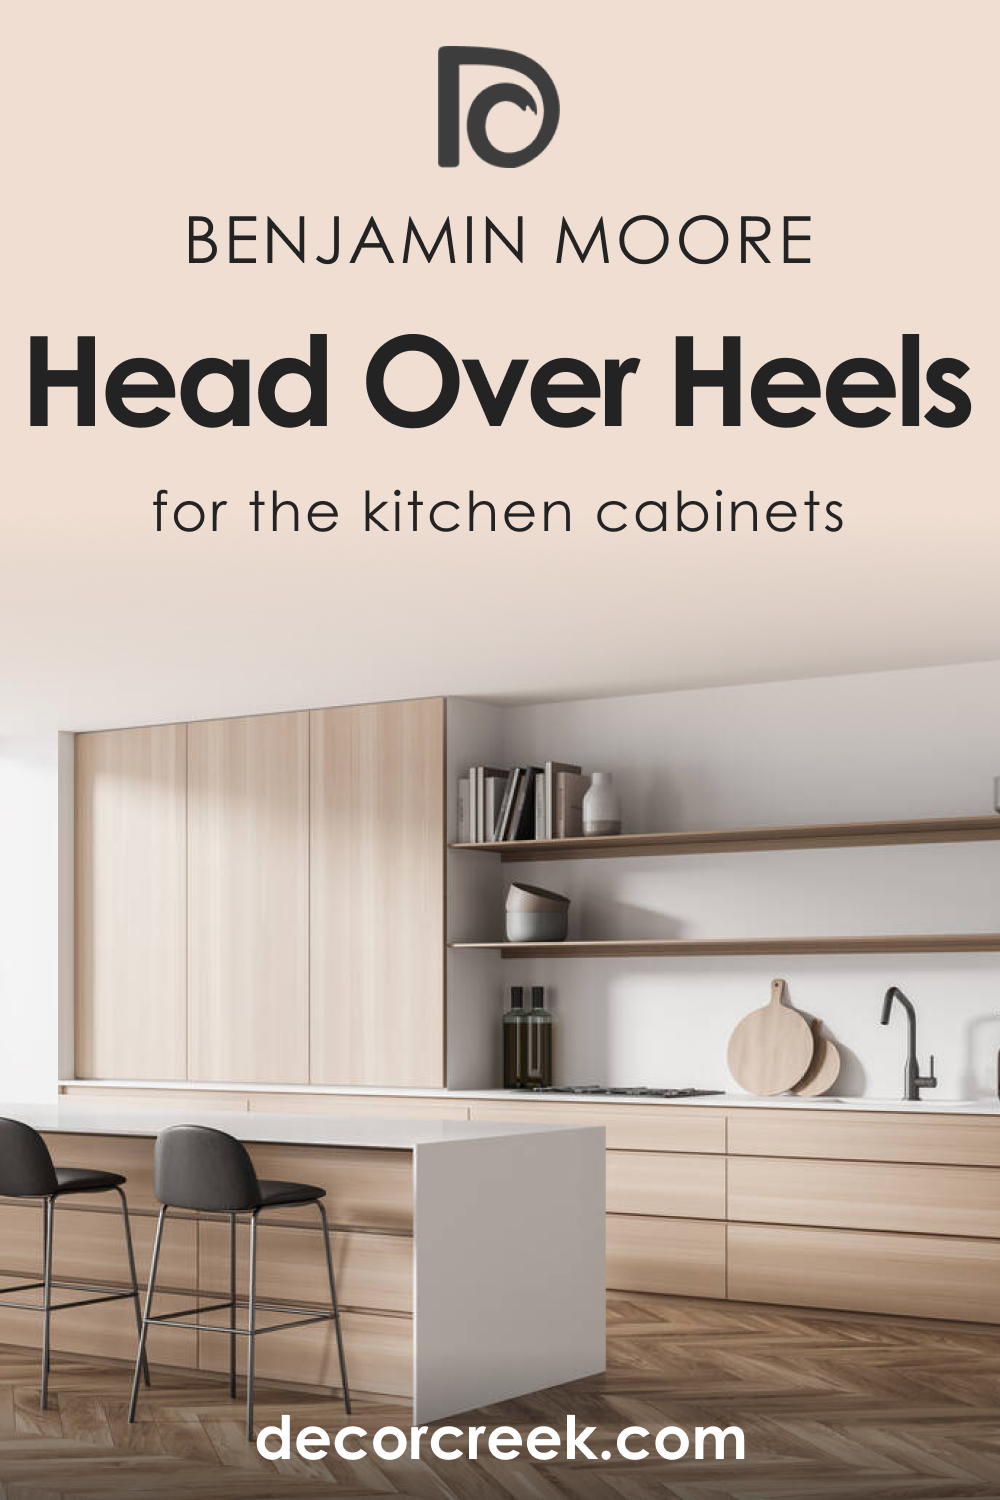 How to Use Head Over Heels AF-250 on Kitchen Cabinets?